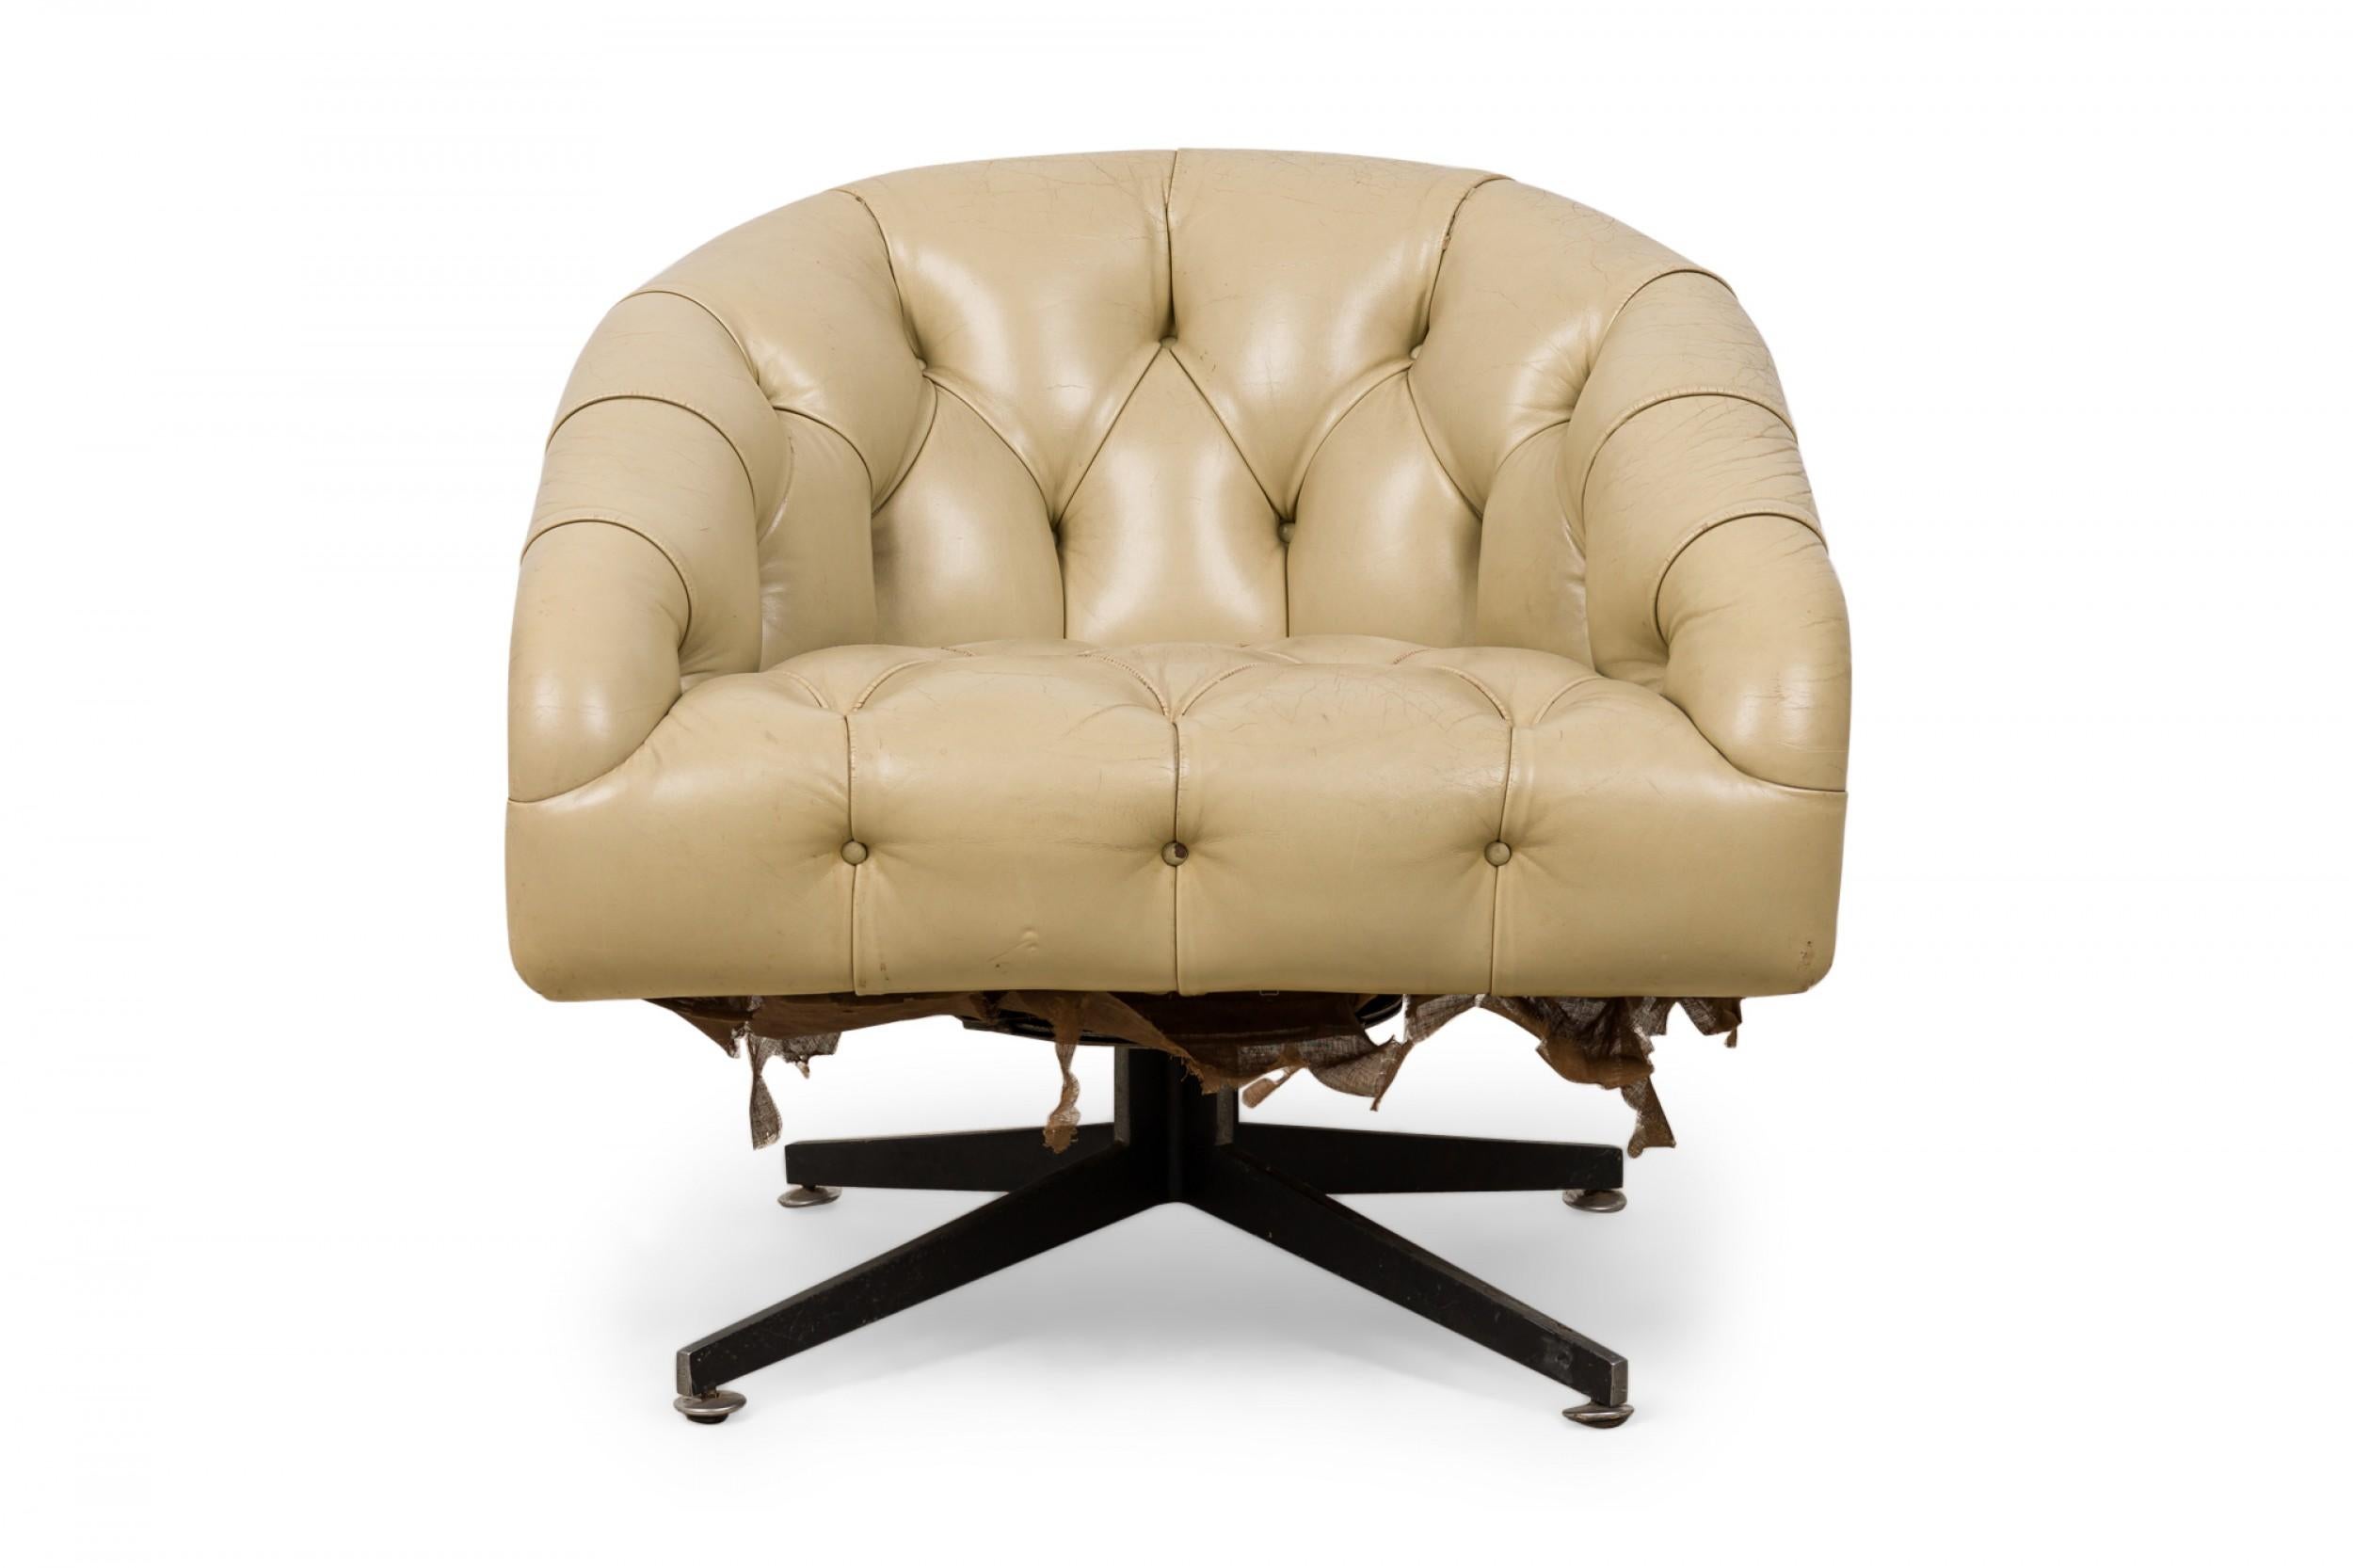 American mid-century tub-form swiveling lounge / armchair with beige button tufted leather upholstery, resting on a four leg brushed chrome pedestal base. (WARD BENNETT)